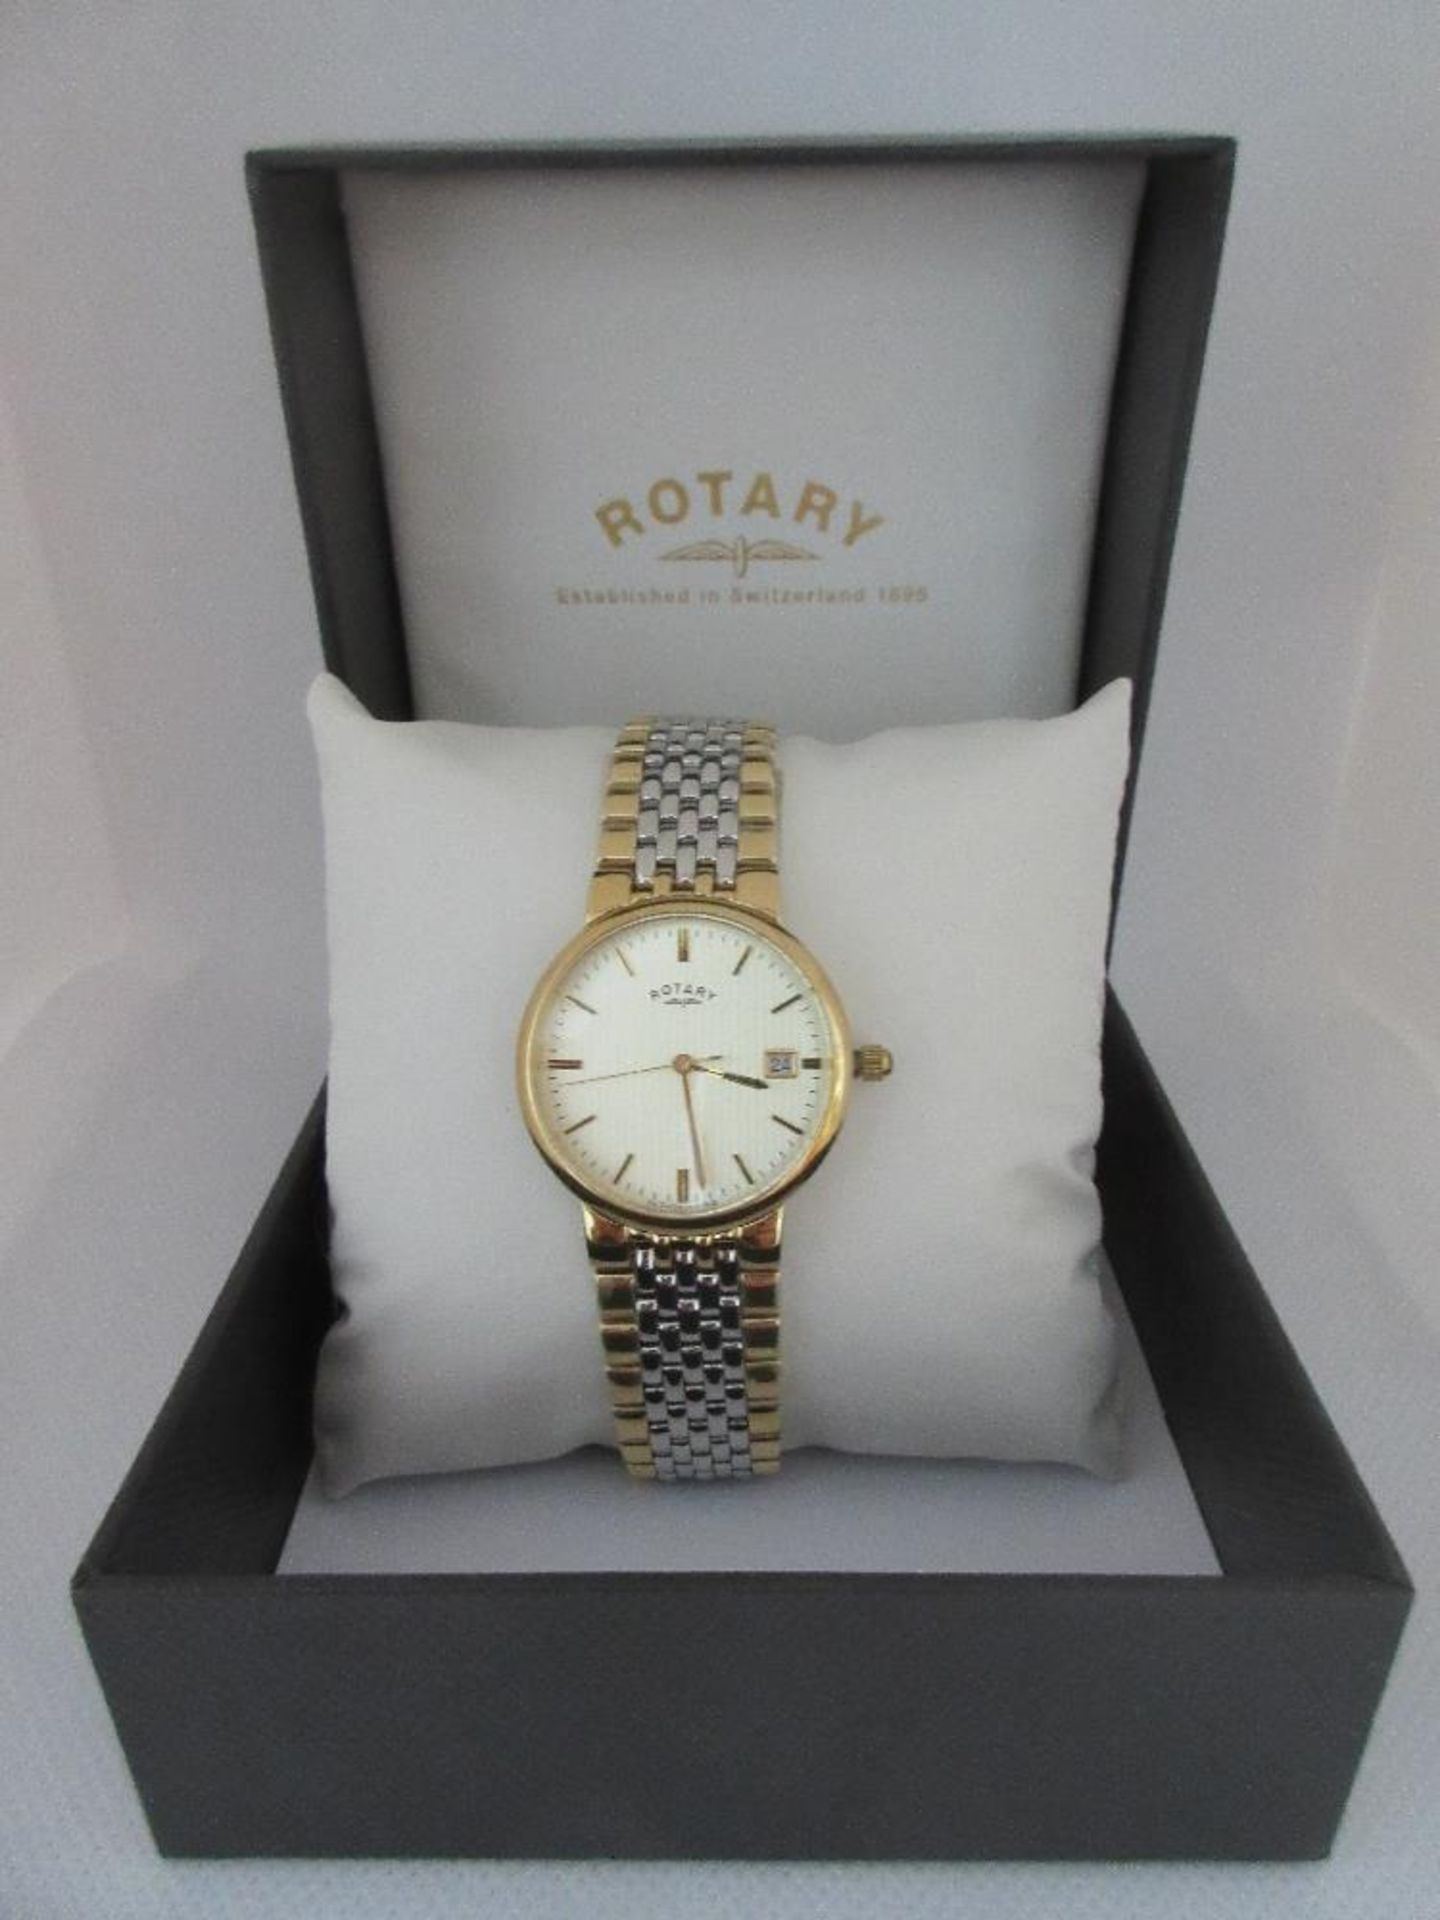 ROTARY MALE WATCH, MODEL GB00497/03, CASE DIAMETER 32MM, STAINLESS STEEL STRAP, BOXED, RRP £ 159